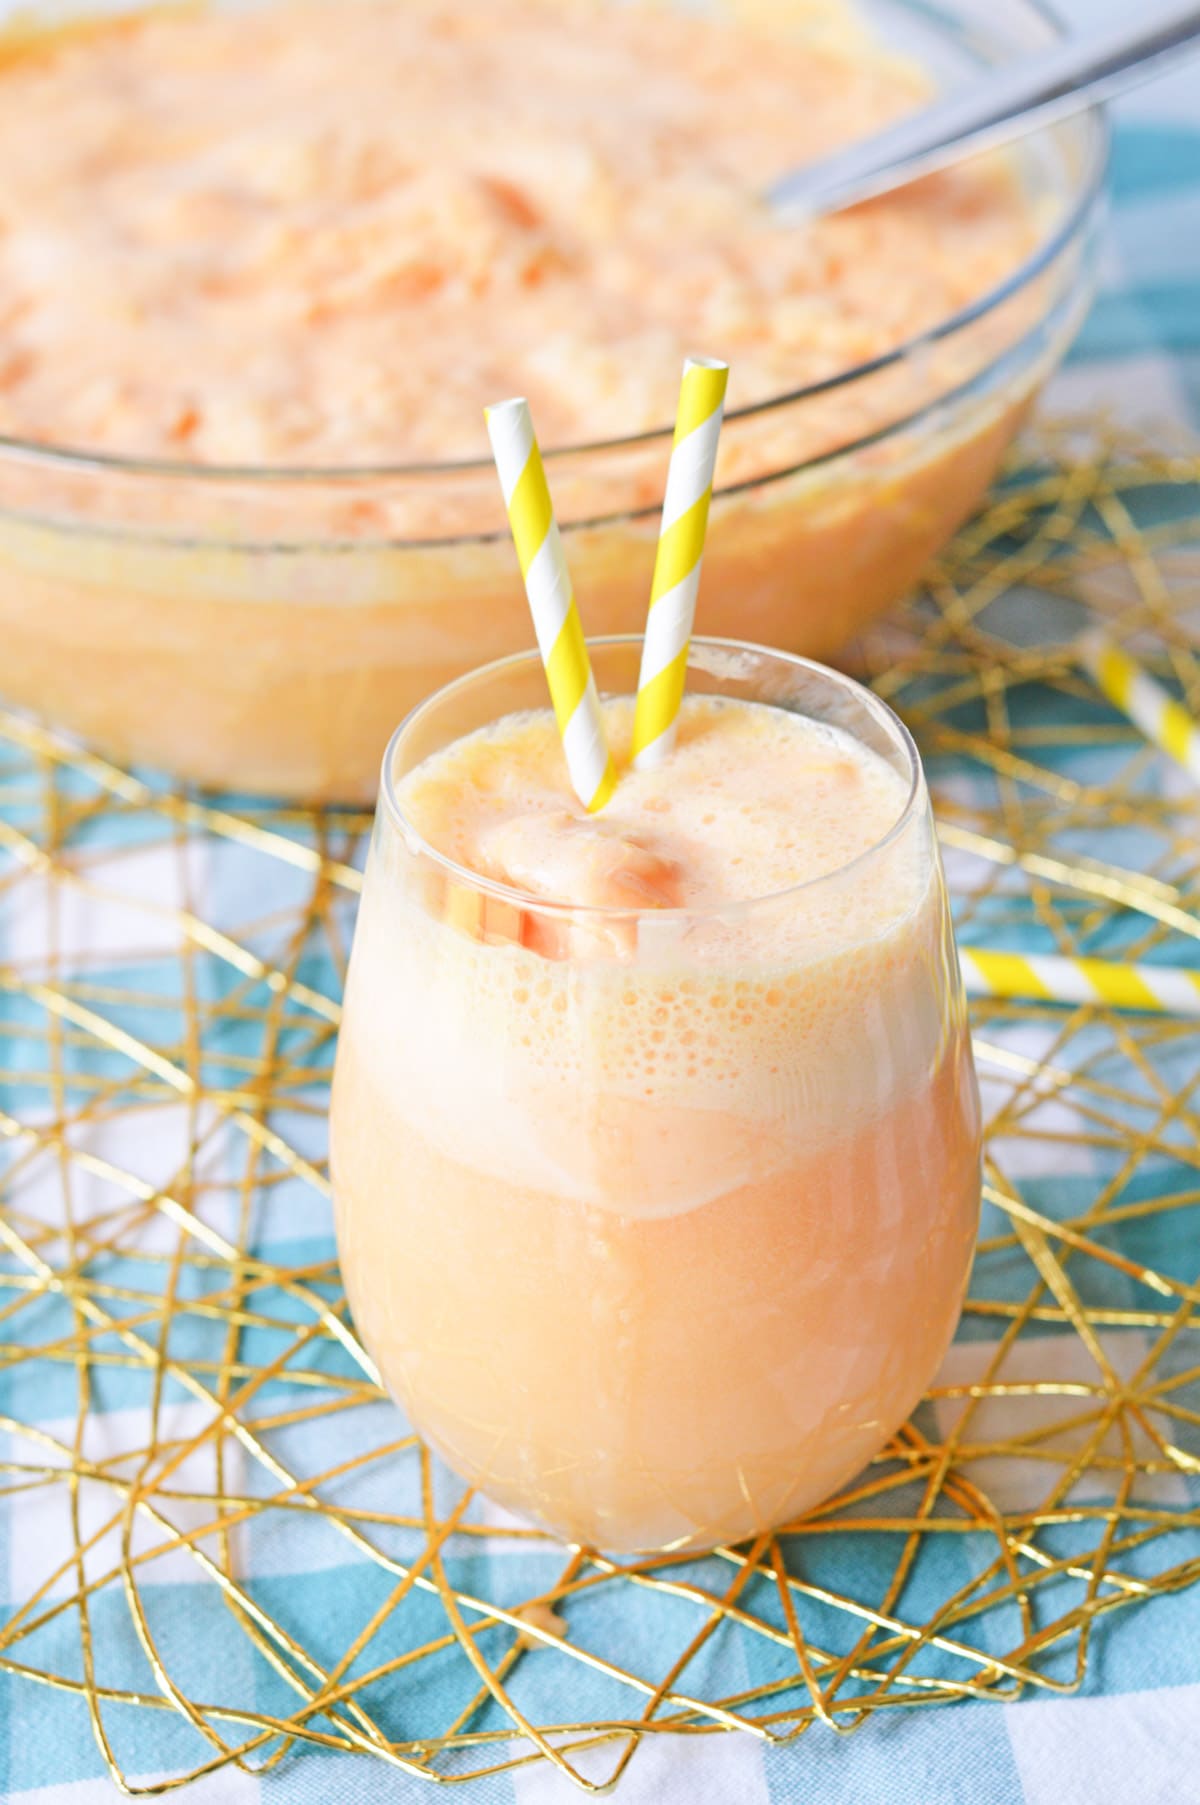 Orange punch in glass with yellow striped straws